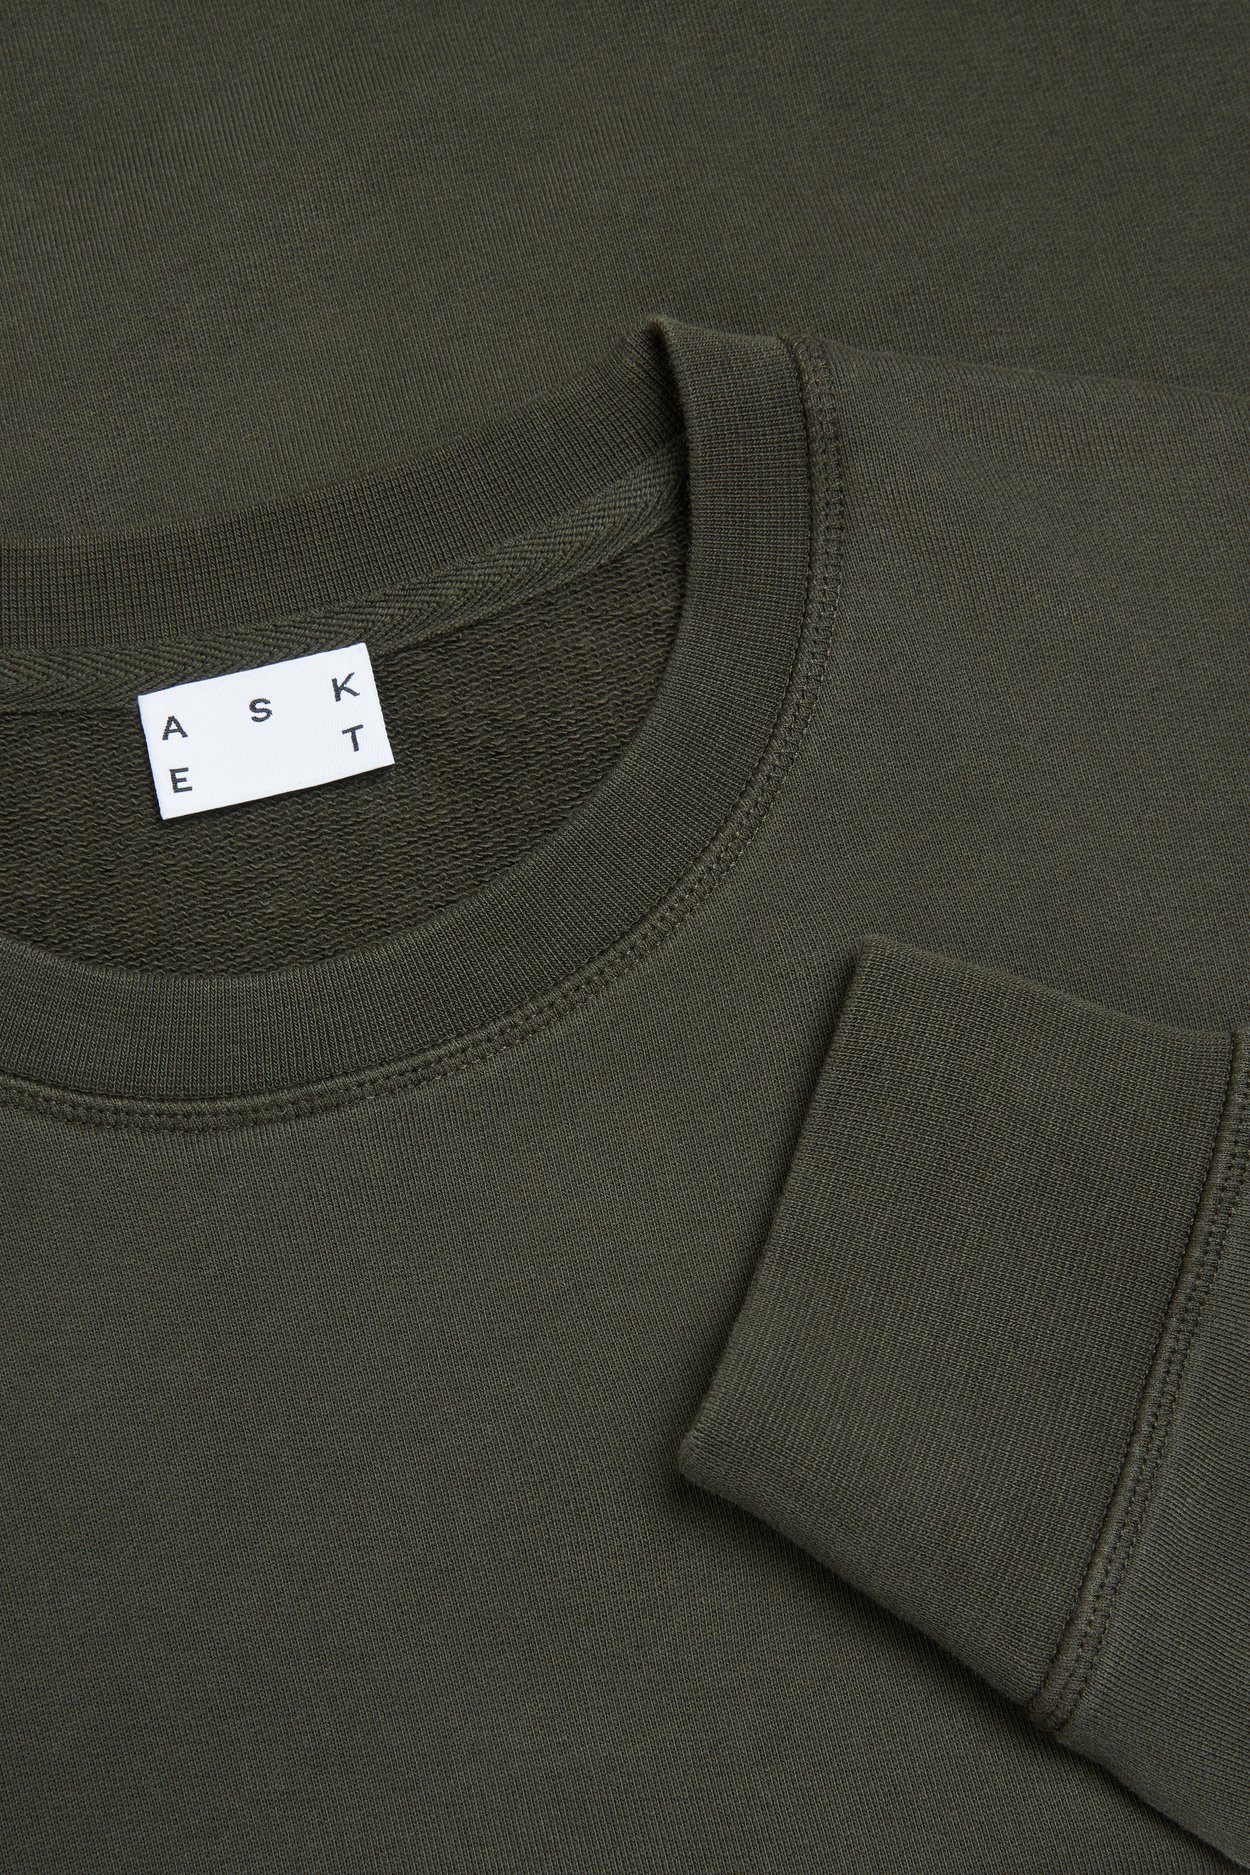 The colorway Dusty Green has been replaced by Mud Green on the Sweatshirt, to match the colors of our hoodies